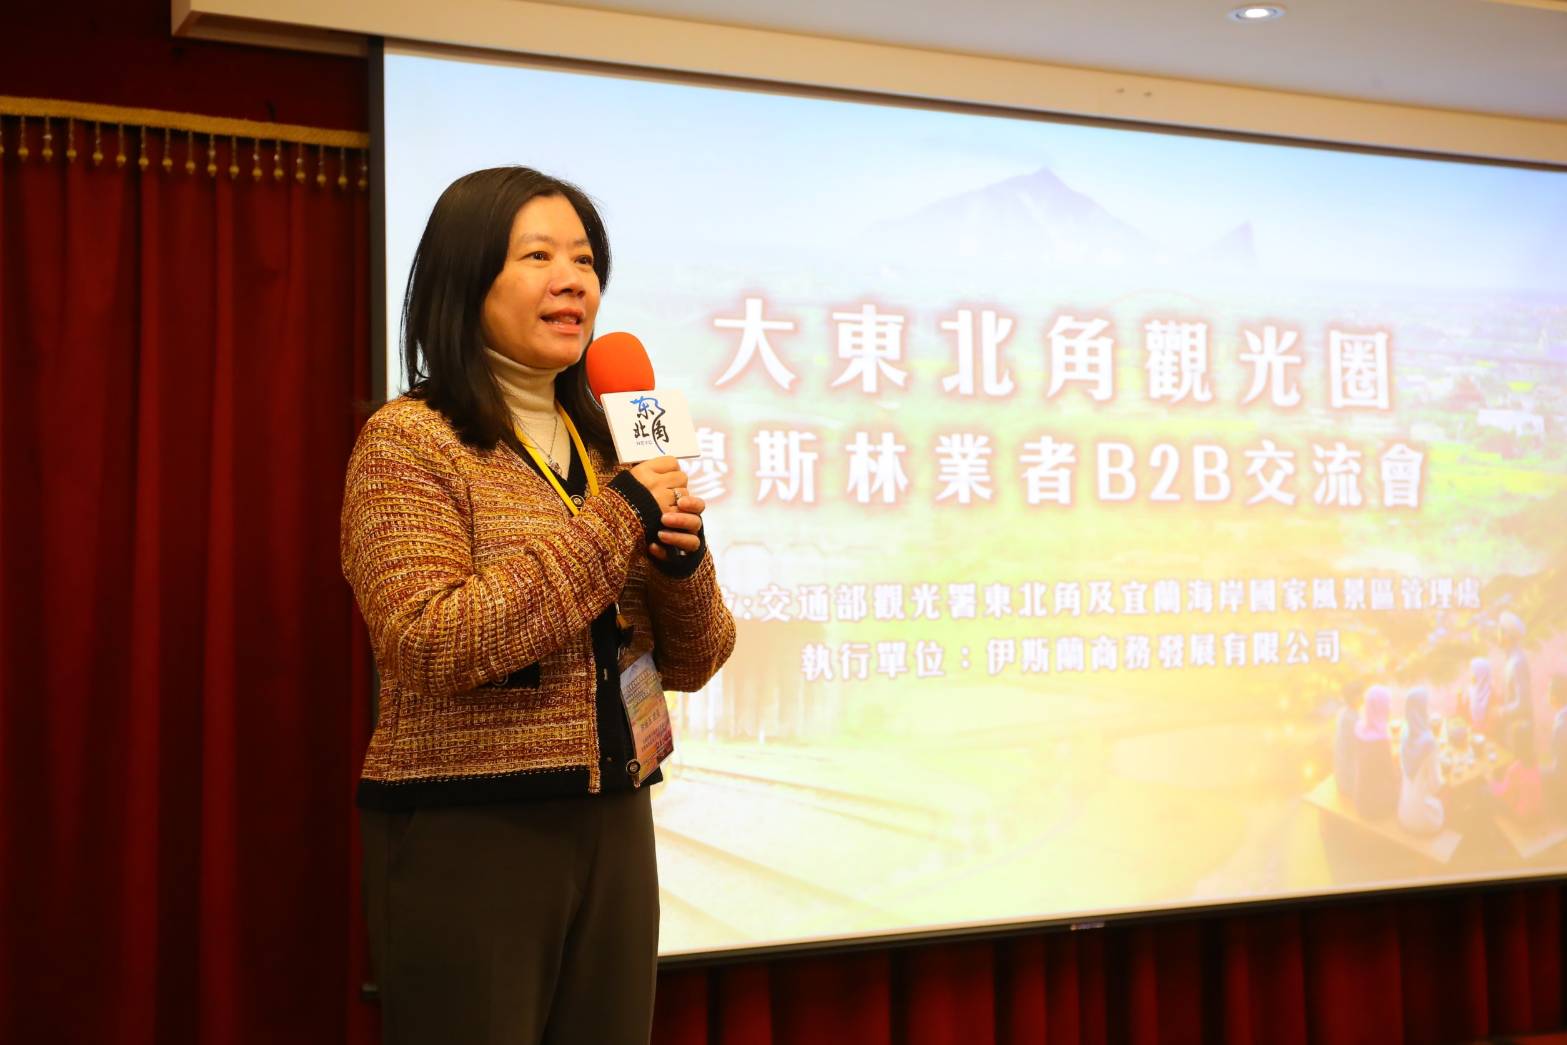 Liyu, Director of Tourism at the Northeast Corner Management Office